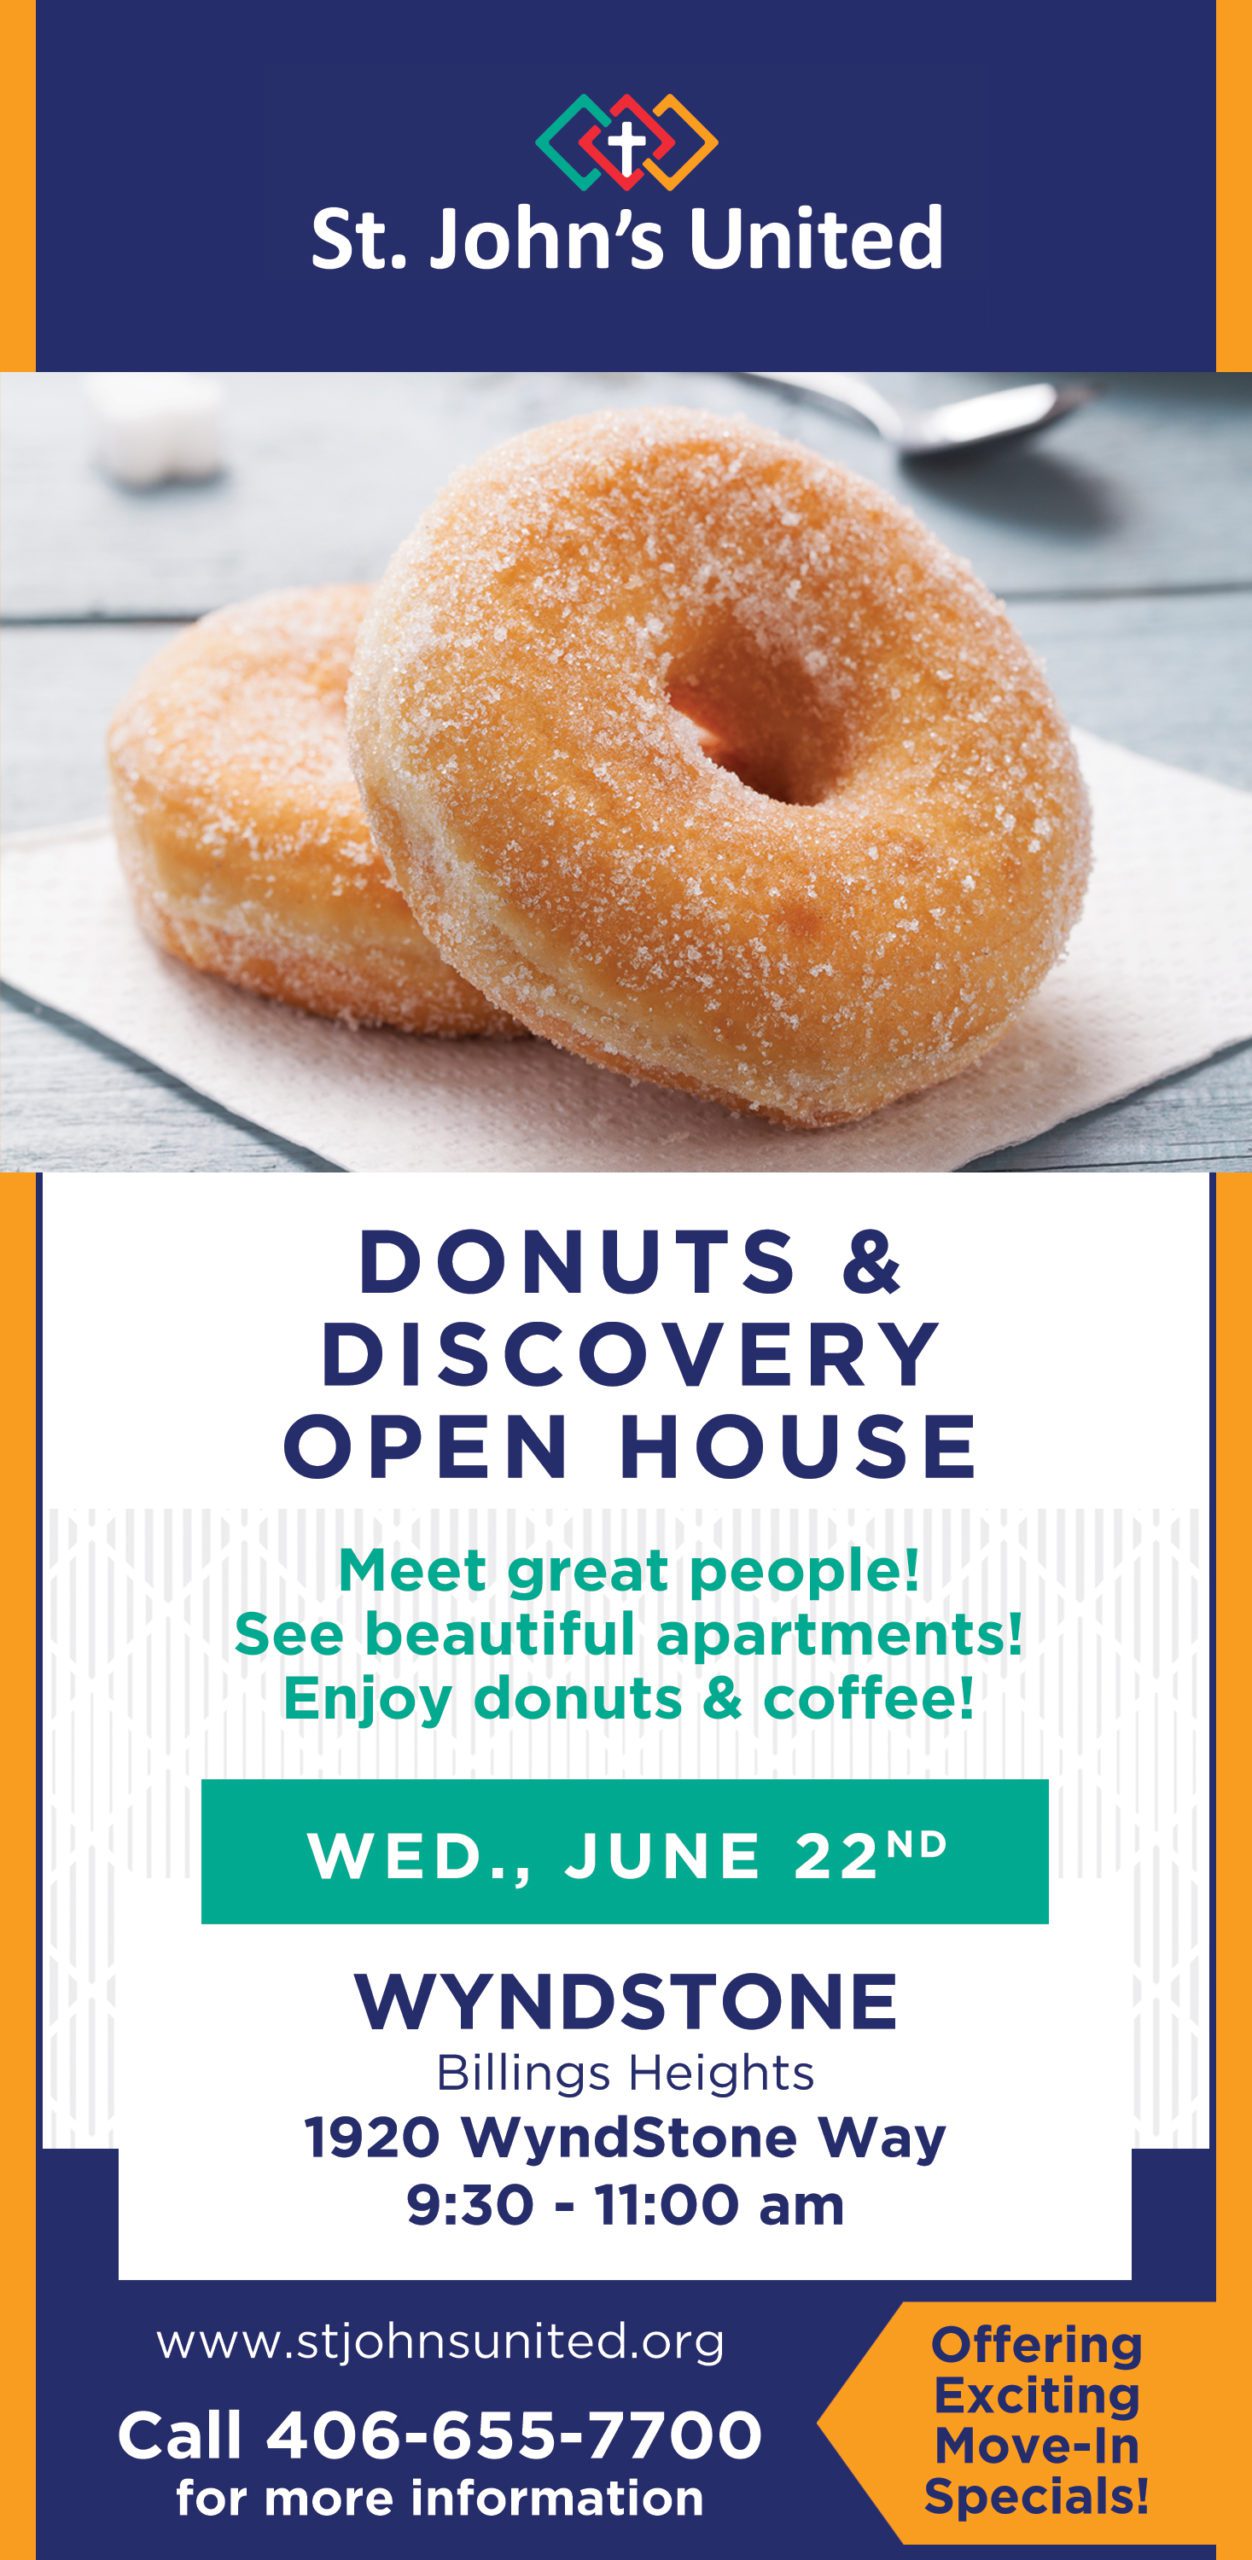 Donuts & Discovery Open House Wyndstone in the Billings Heights